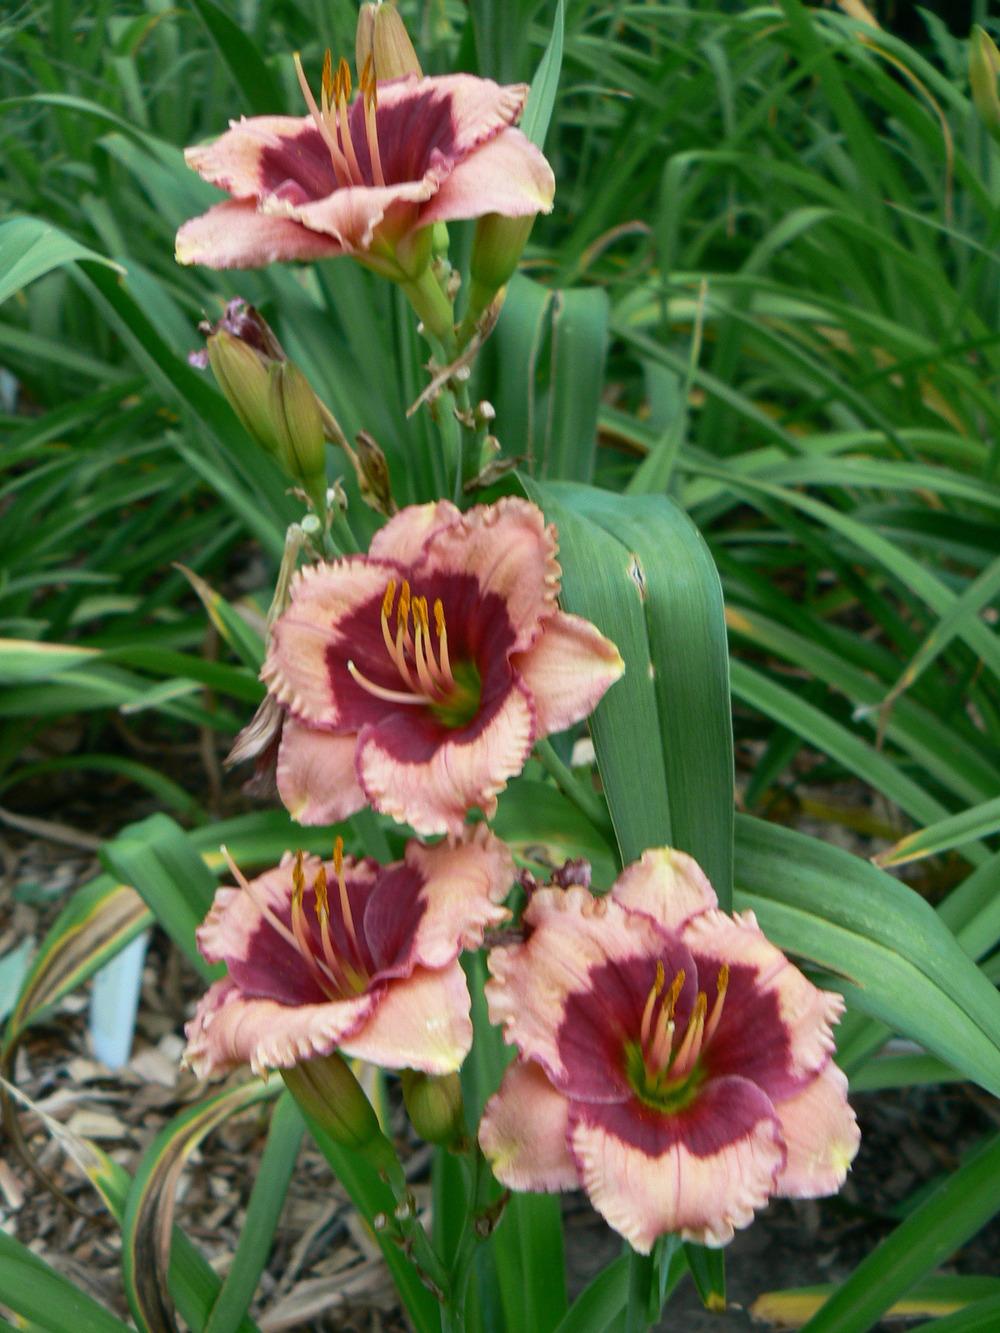 Photo of Daylily (Hemerocallis 'Mary Ethel Anderson') uploaded by annred97